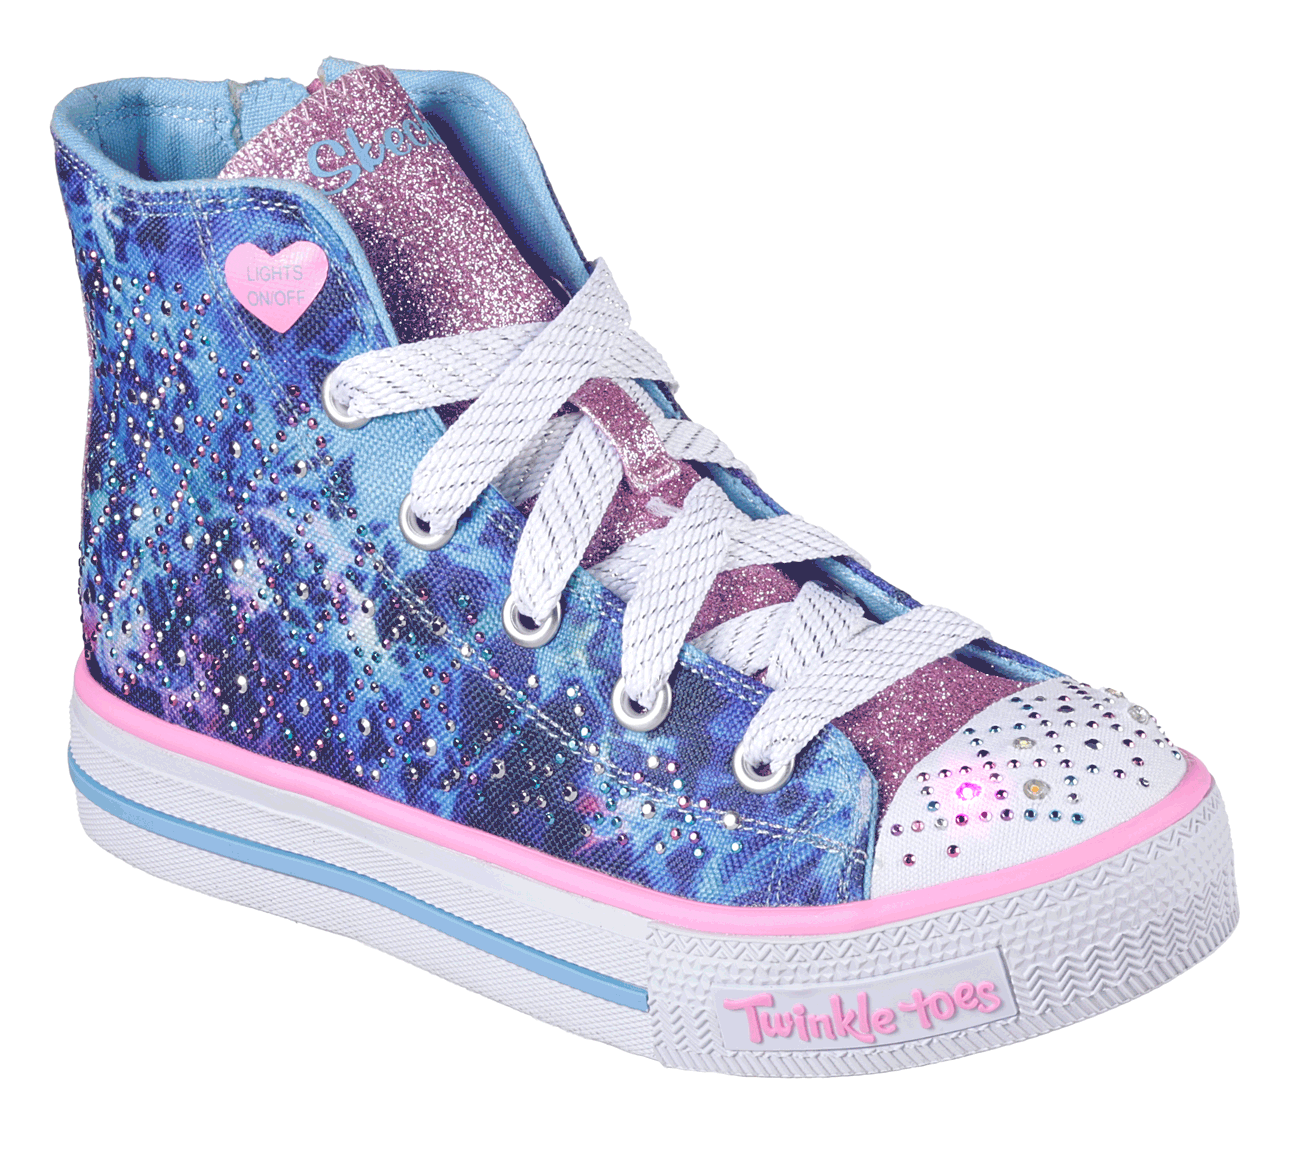 Buy SKECHERS Twinkle Toes: Shuffles - Studded Steps S-Lights Shoes